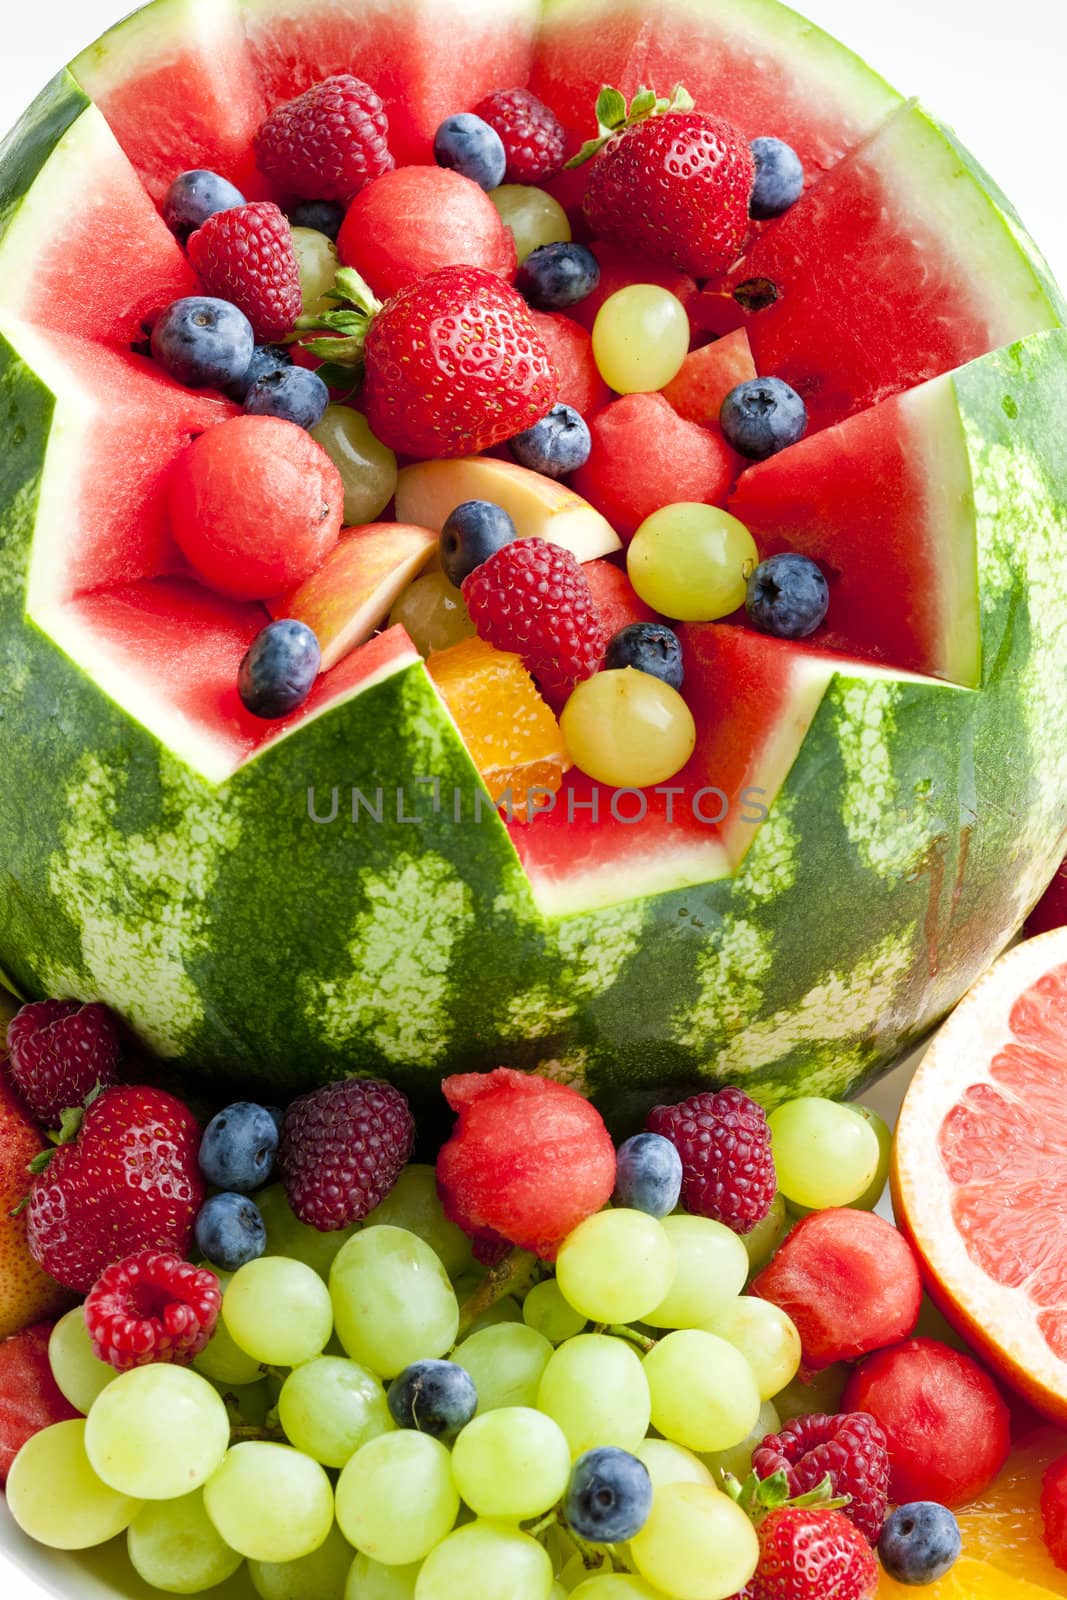 fruit salad in water melon by phbcz